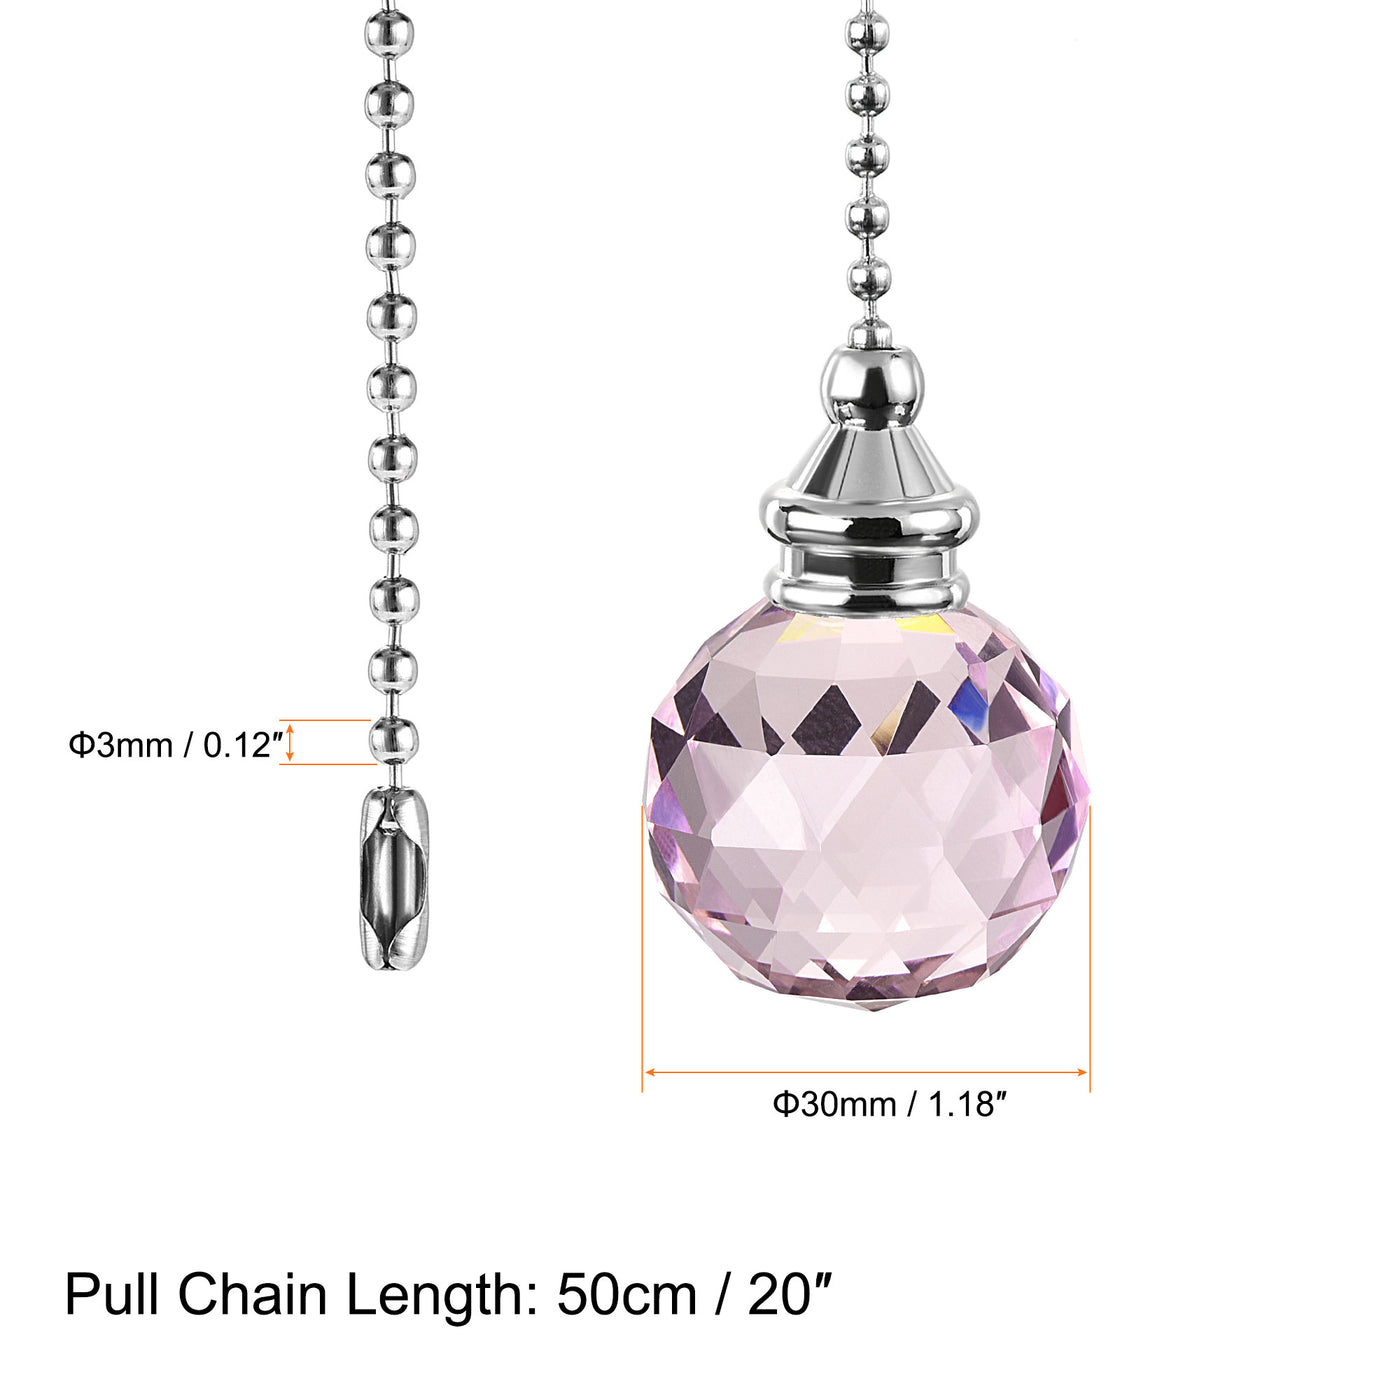 uxcell Uxcell Ceiling Fan Pull Chain, 20 Inch Nickel Finish Chain Ornament Extension, 30mm Pink Crystal Ball Pendant